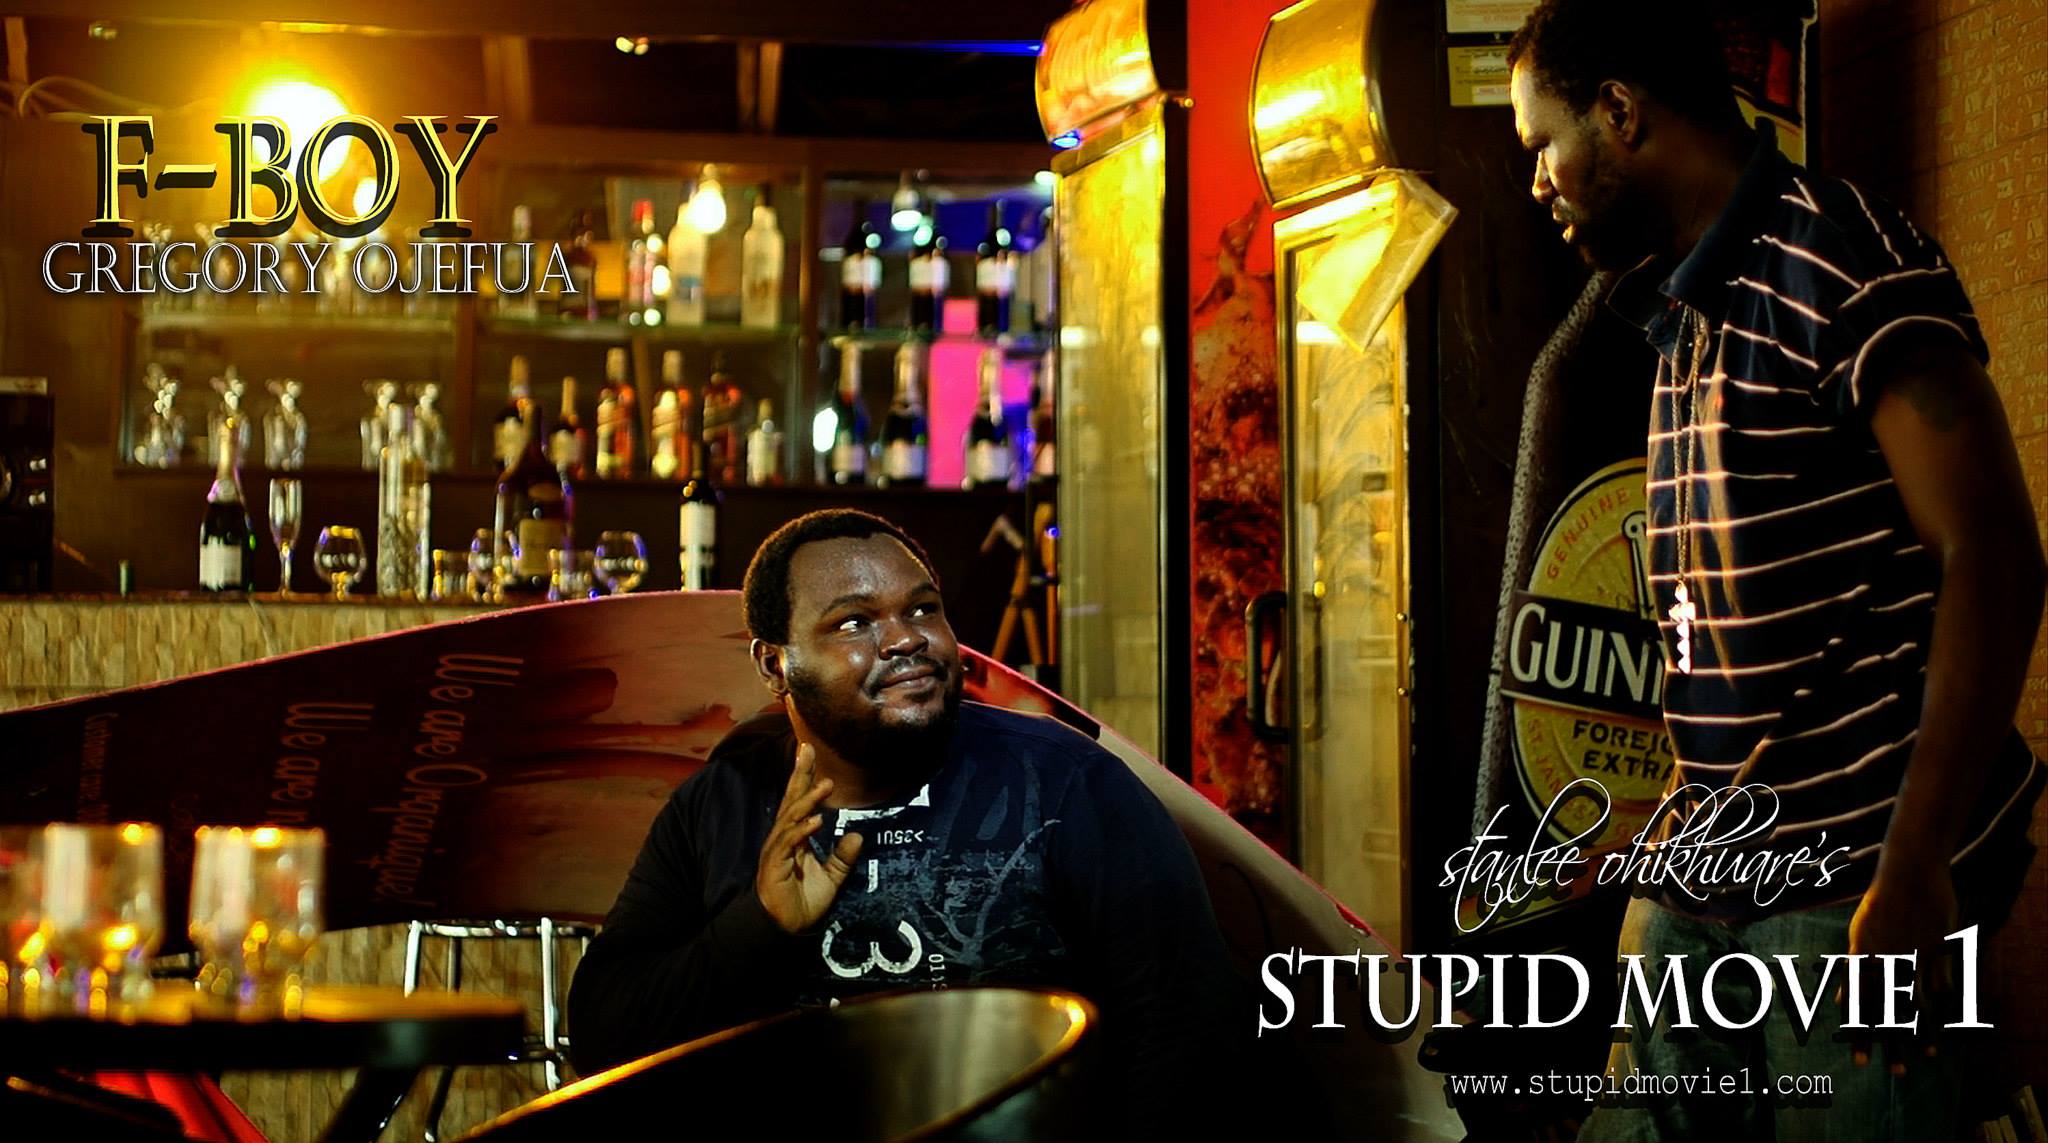 CHARACTER POSTER (F-BOY - Gregory Ojefua) for Stanlee Ohikhuare's STUPID MOVIE 1